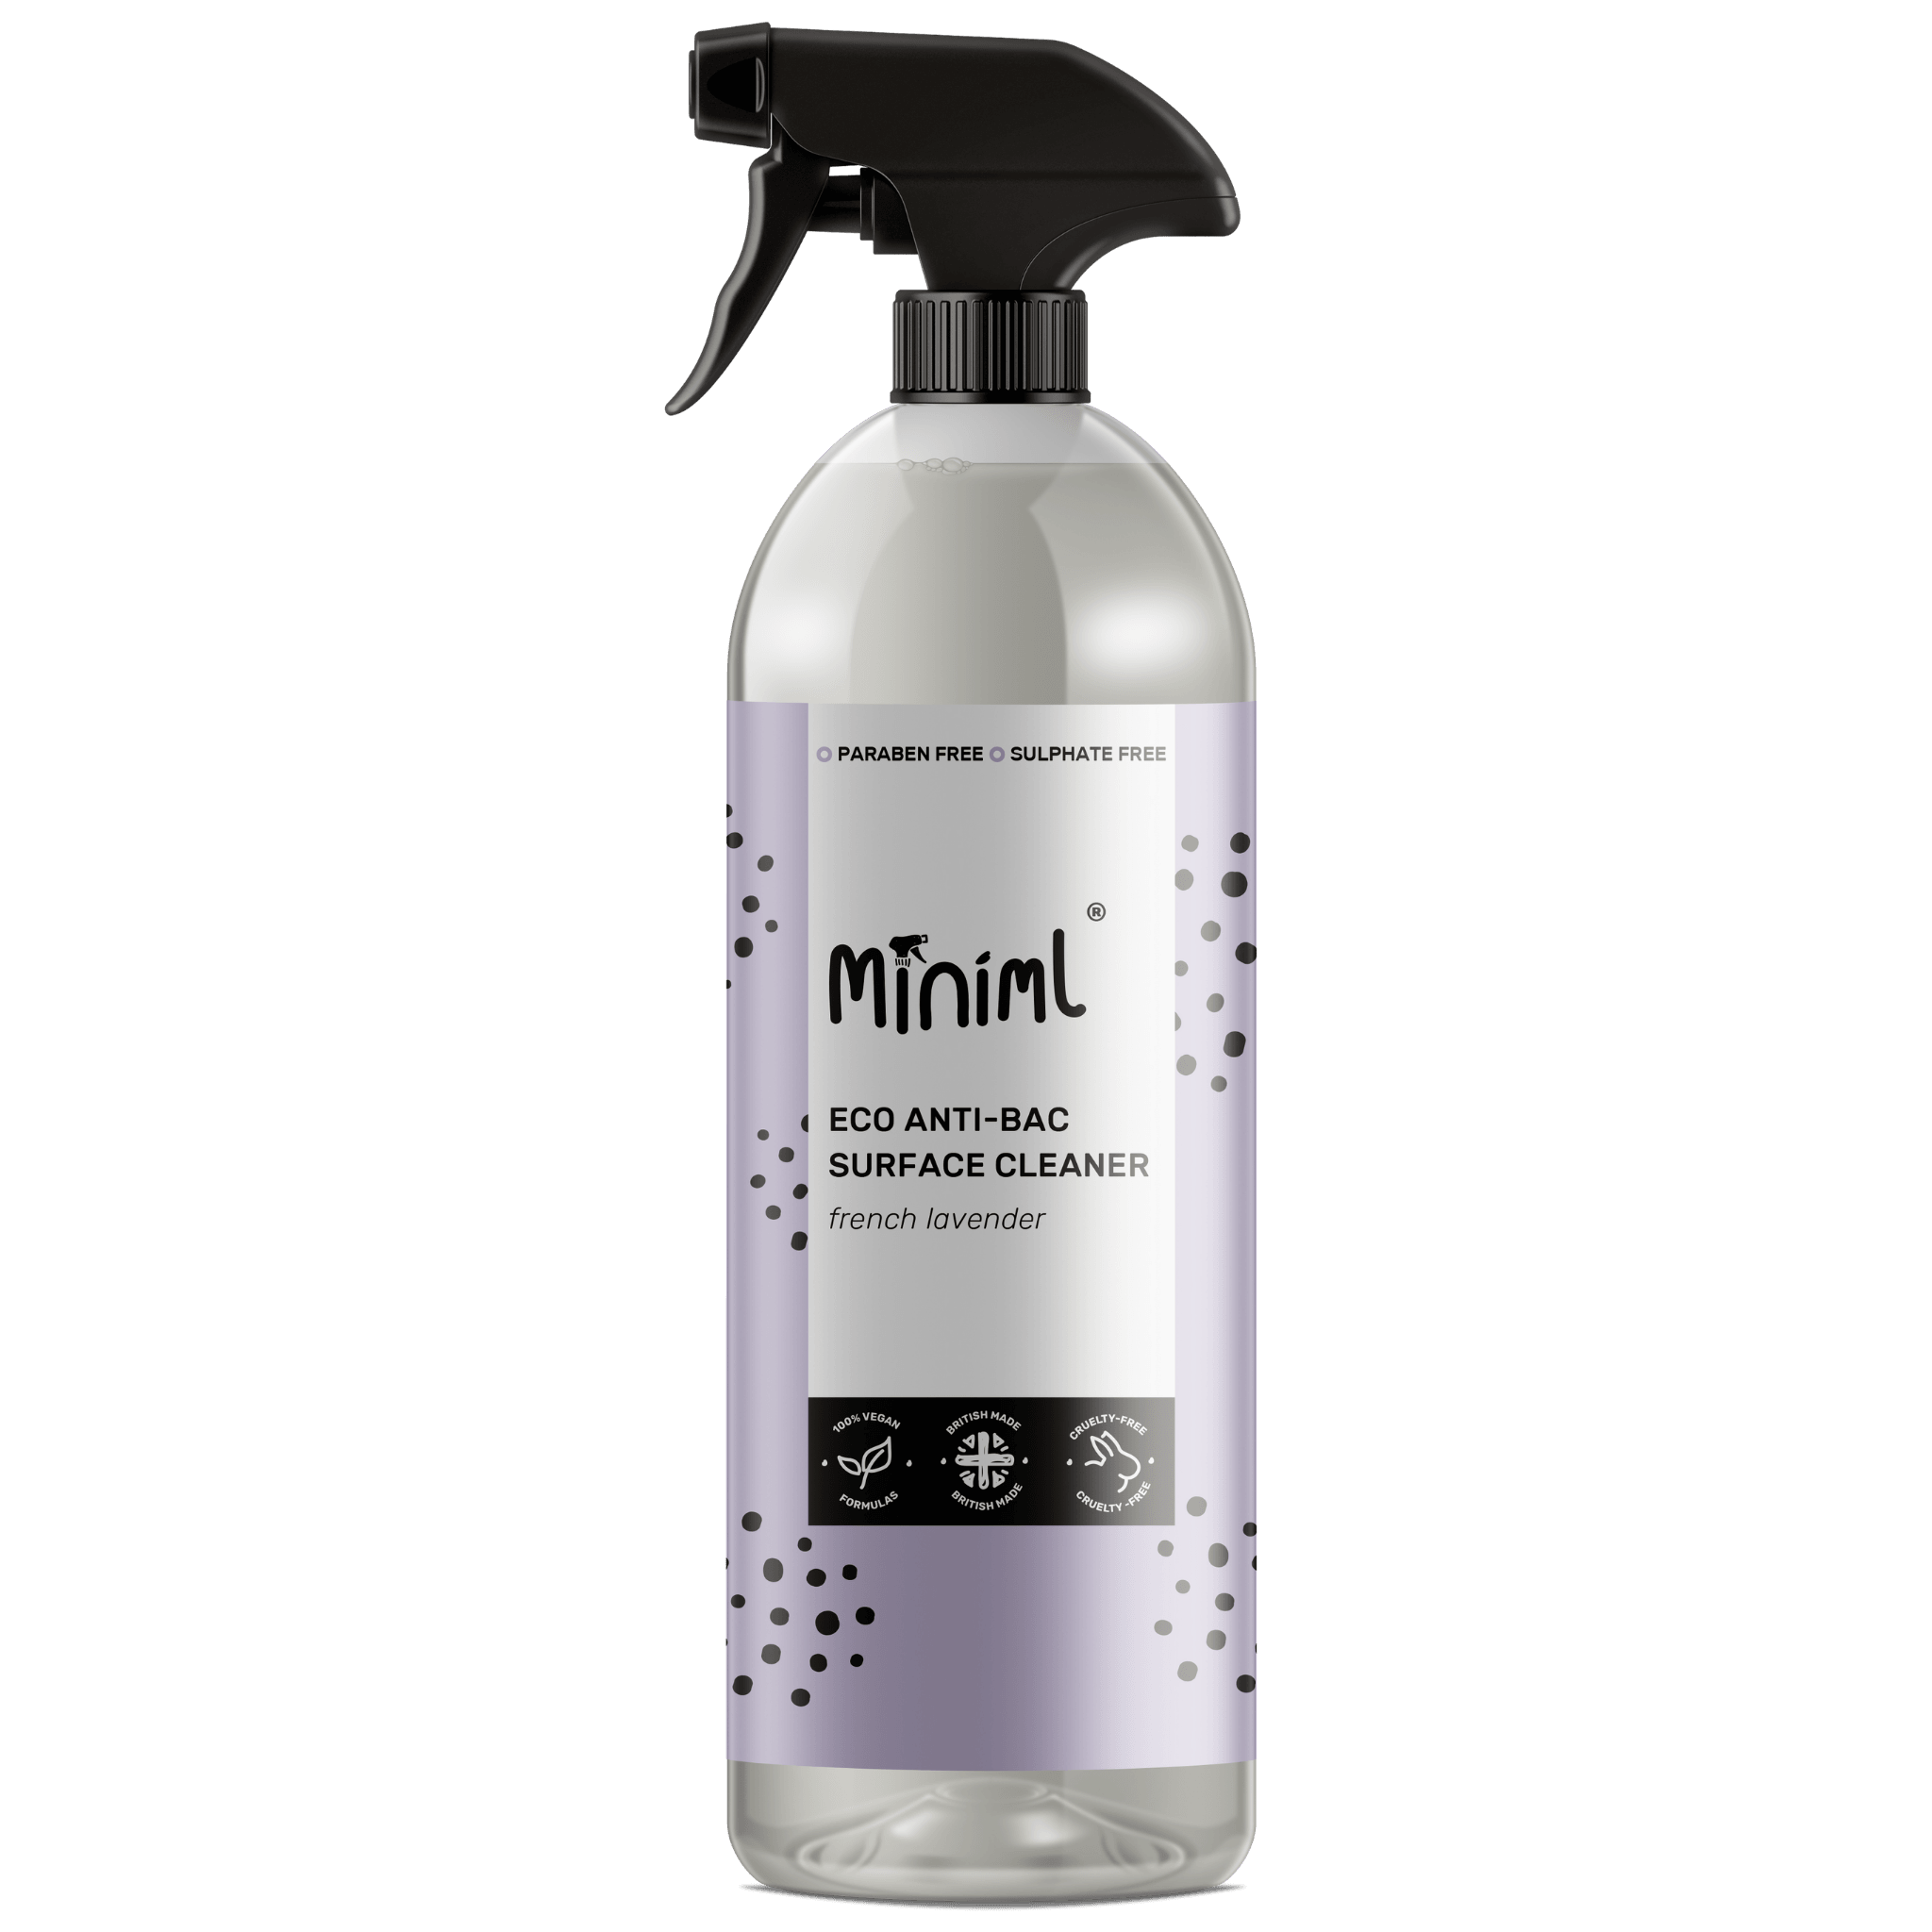 Miniml - Eco Friendly - Anti-Bac Surface Cleaner - French Lavender - 750ml Spray - Vending Superstore